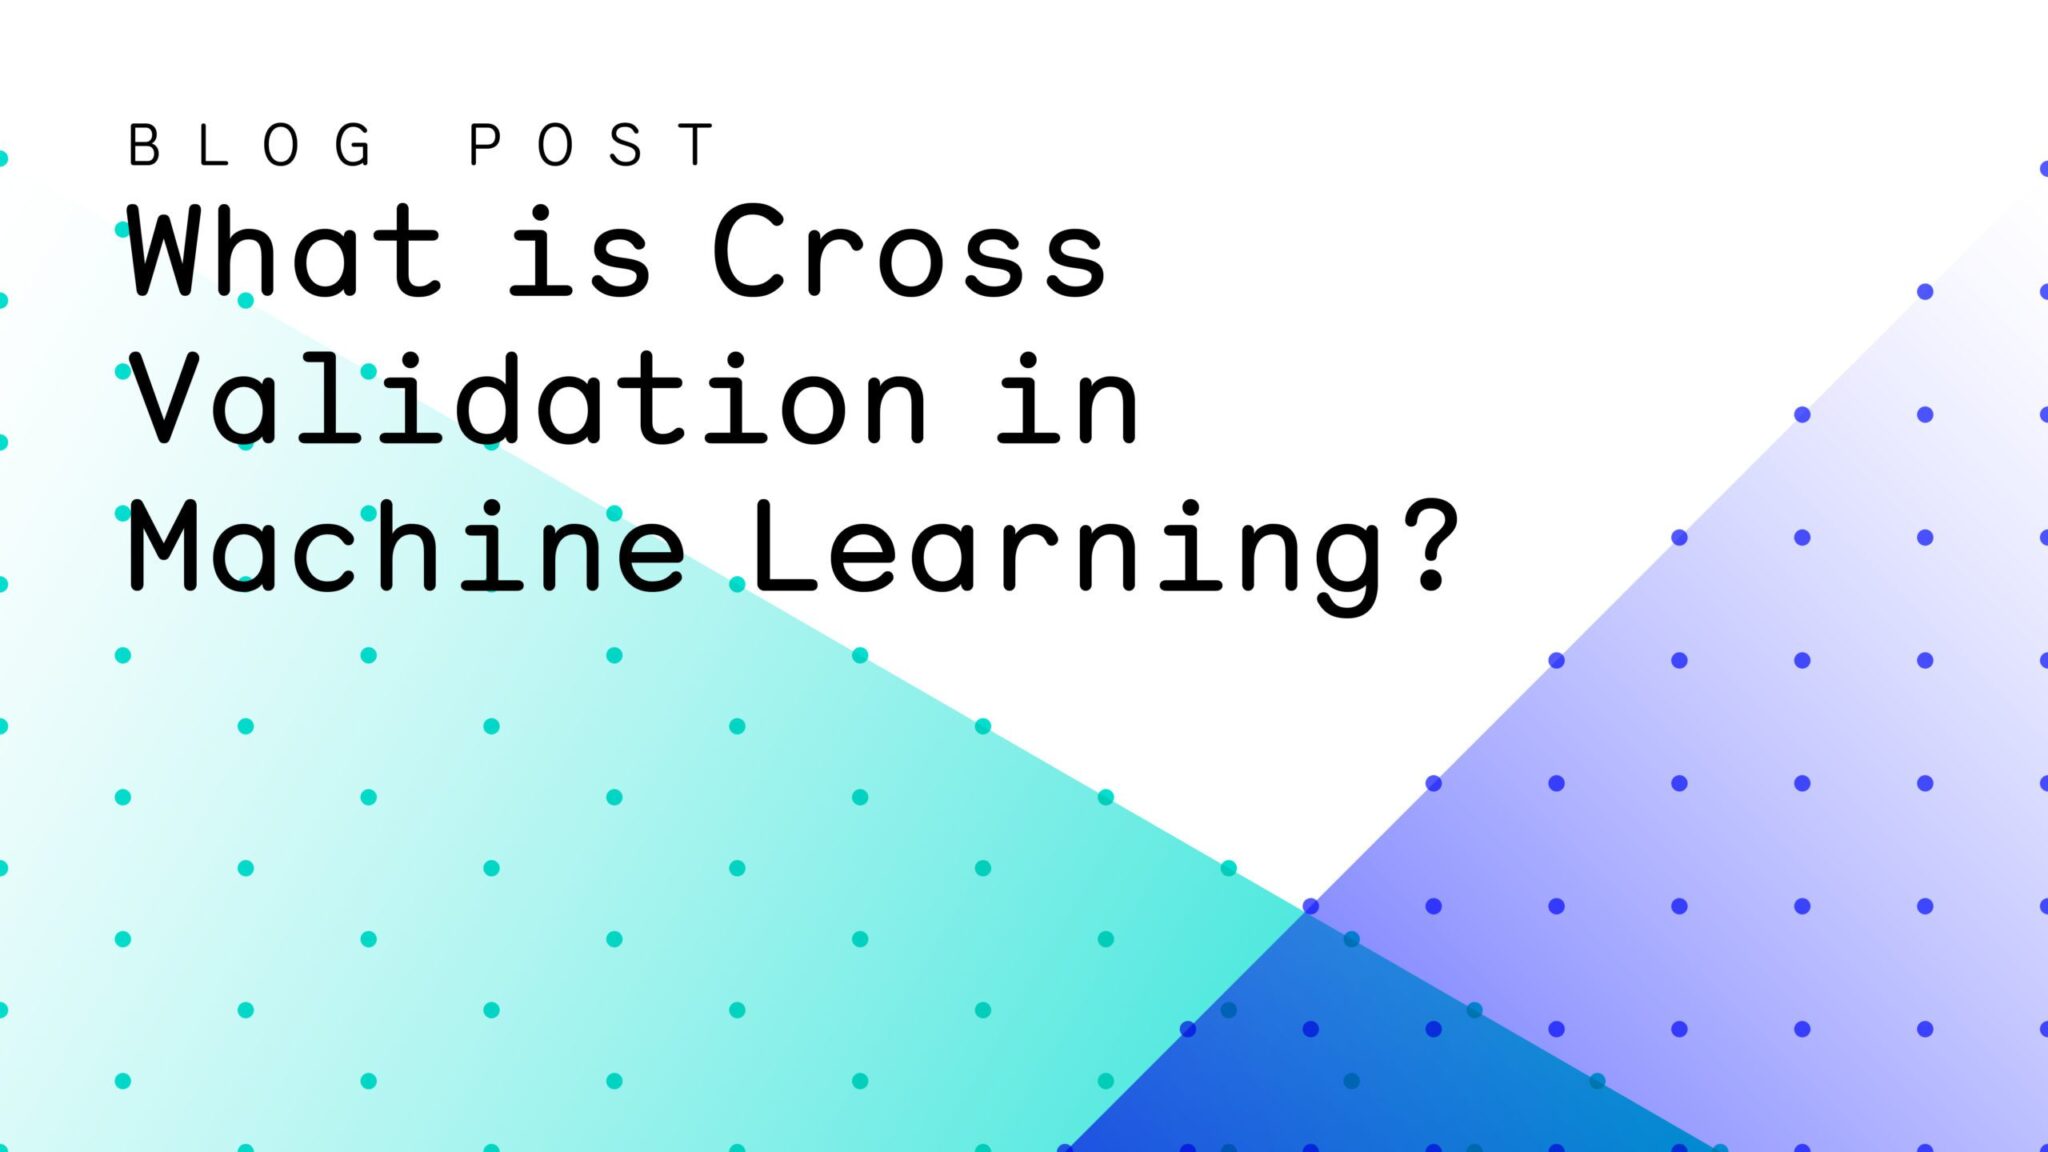 What is Cross Validation in Machine Learning